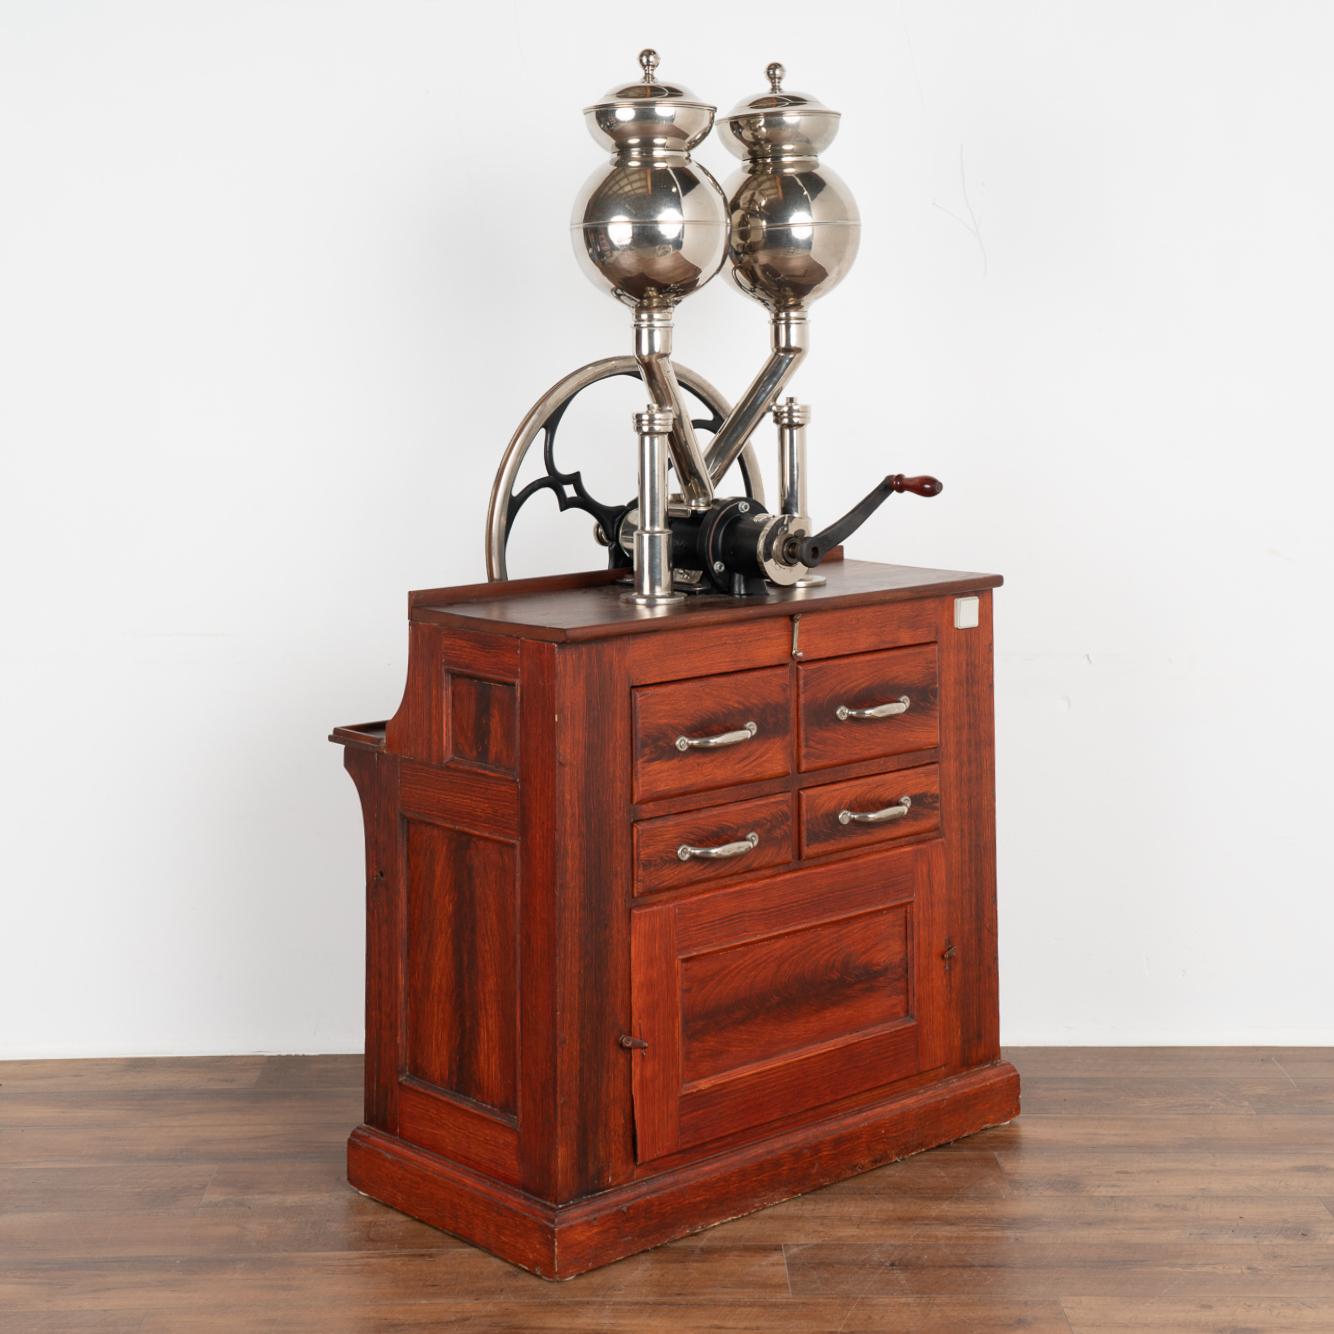 Double coffee mill with motor, two funnels, mill wheel made of iron.
Plaque reads: Frigangs-Kaffemolle; A.Jørgensens & Co. (of Copenhagen, Denmark).
Lower part of red painted wood with metal lined drawers to capture coffee grounds. 
Sold in